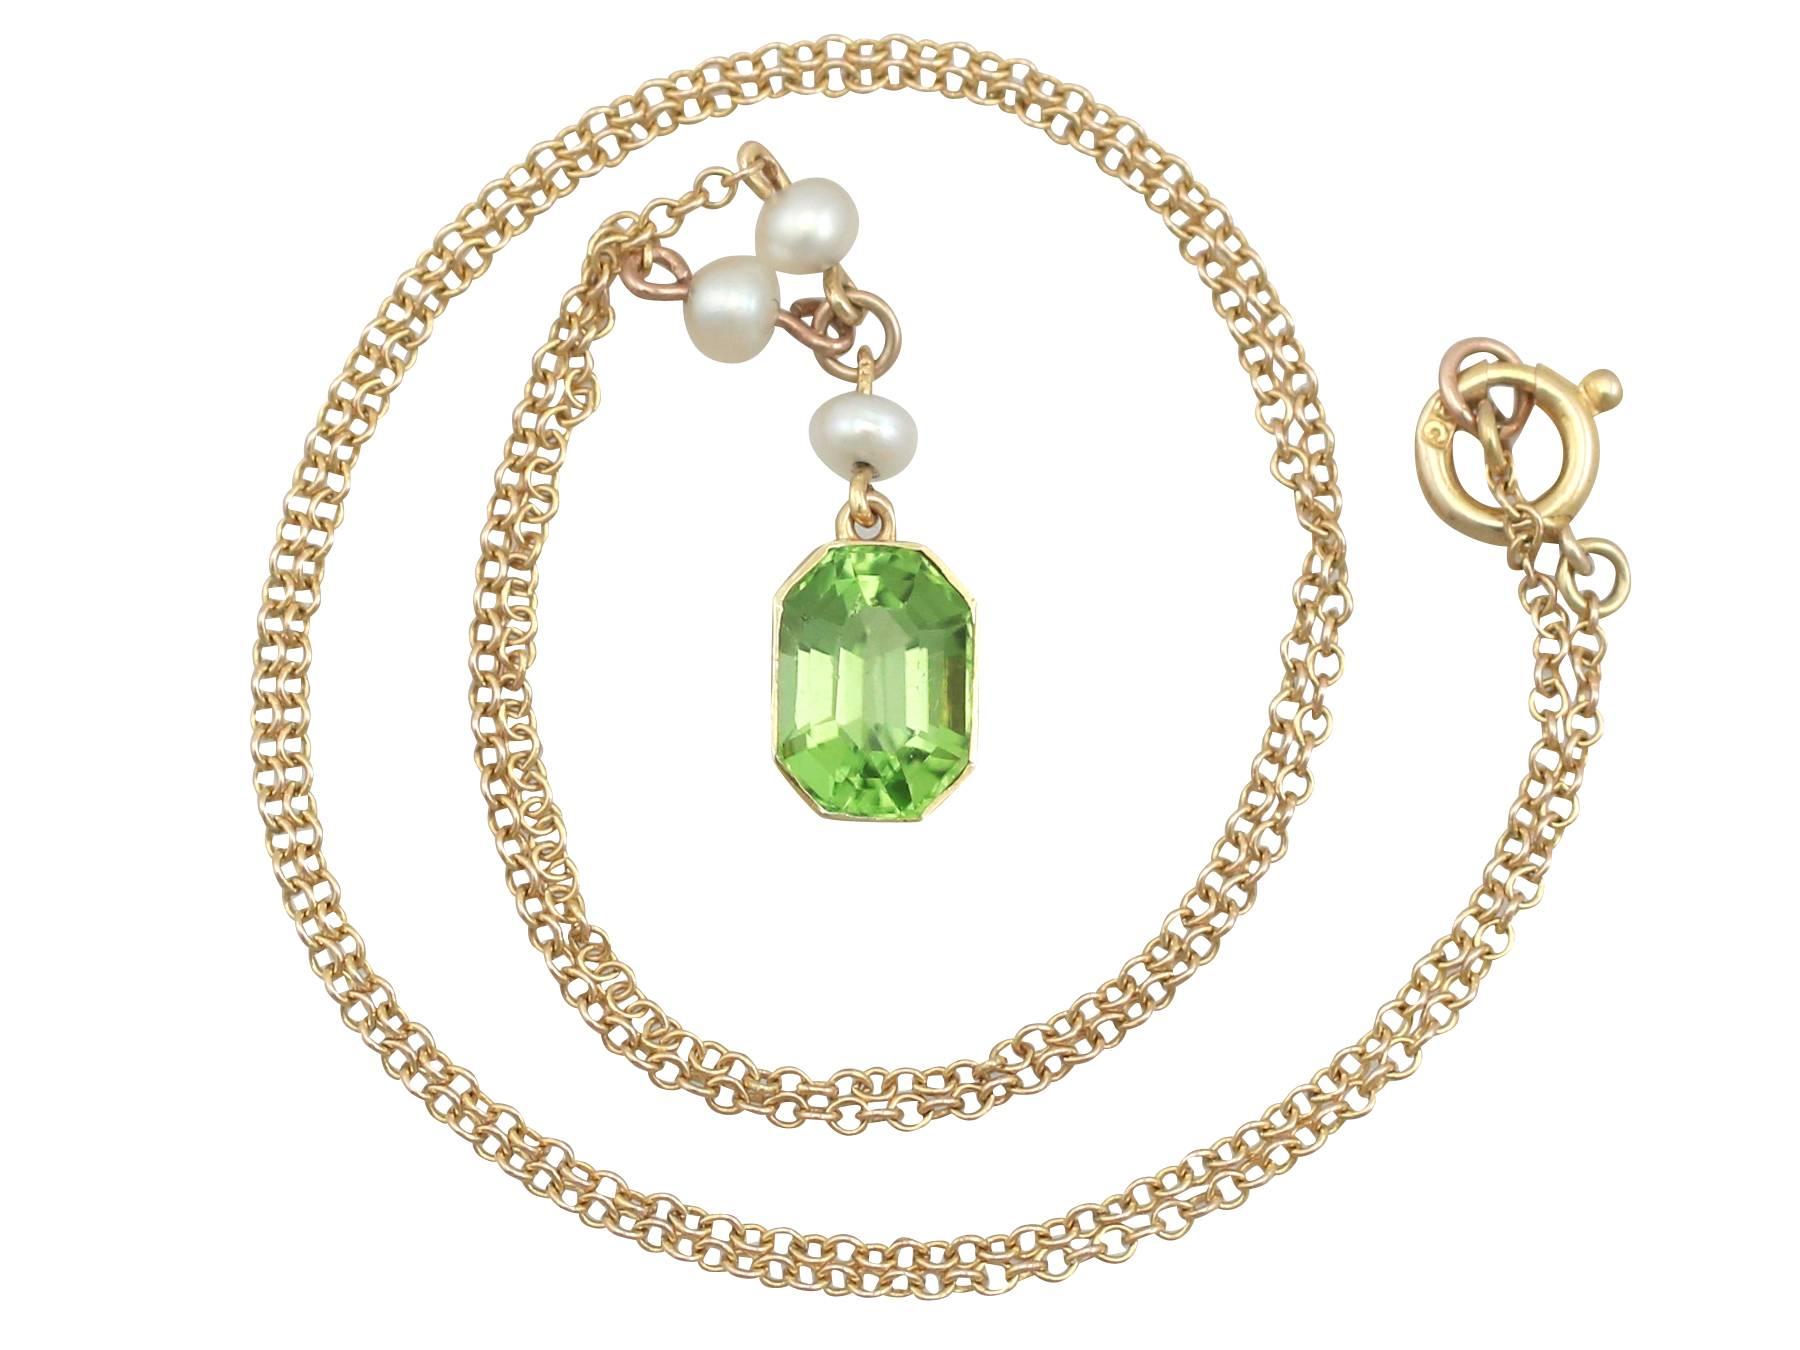 An impressive antique 3.16 carat peridot and seed pearl, 15 carat yellow gold pendant on a 9 karat yellow gold chain; part of our diverse gemstone jewelry collections.

This fine and impressive antique peridot pendant has been crafted in 15k yellow